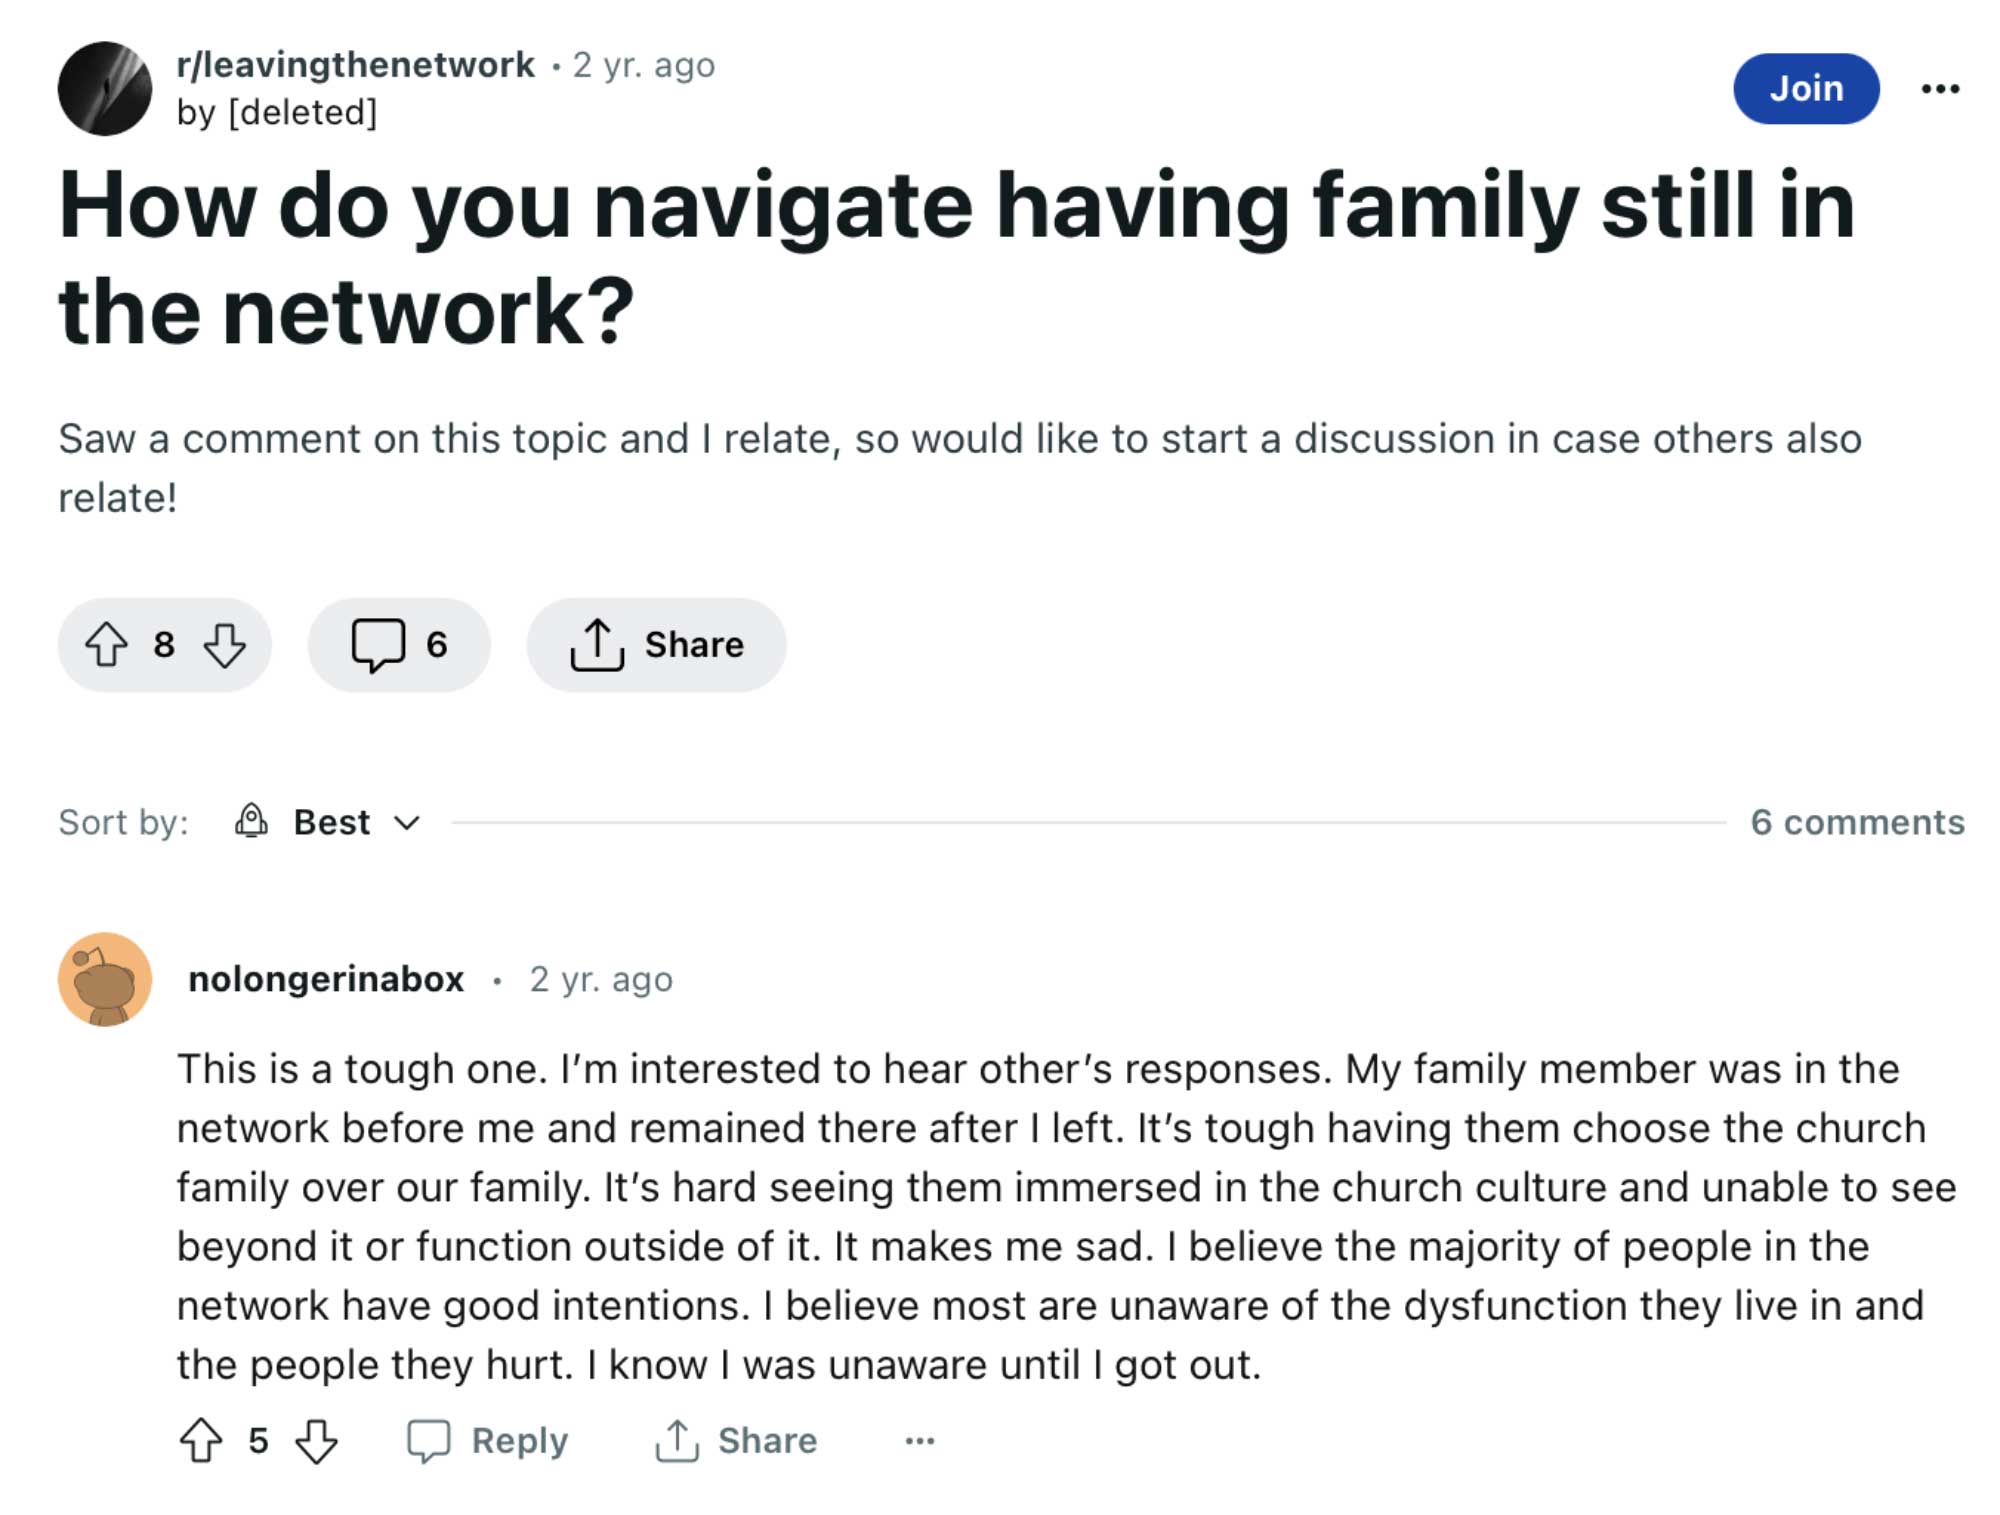 How do you navigate having family still in the network? This is a tough one. I'm interested to hear other's responses. My family member was in the network before me and remained there after I left. It's tough having them choose the church family over our family. It's hard seeing them immersed in the church culture and unable to see beyond it or function outside of it. It makes me sad. I believe the majority of people in the network have good intentions. I believe most are unaware of the dysfunction they live in and the people they hurt. I know I was unaware until I got out."